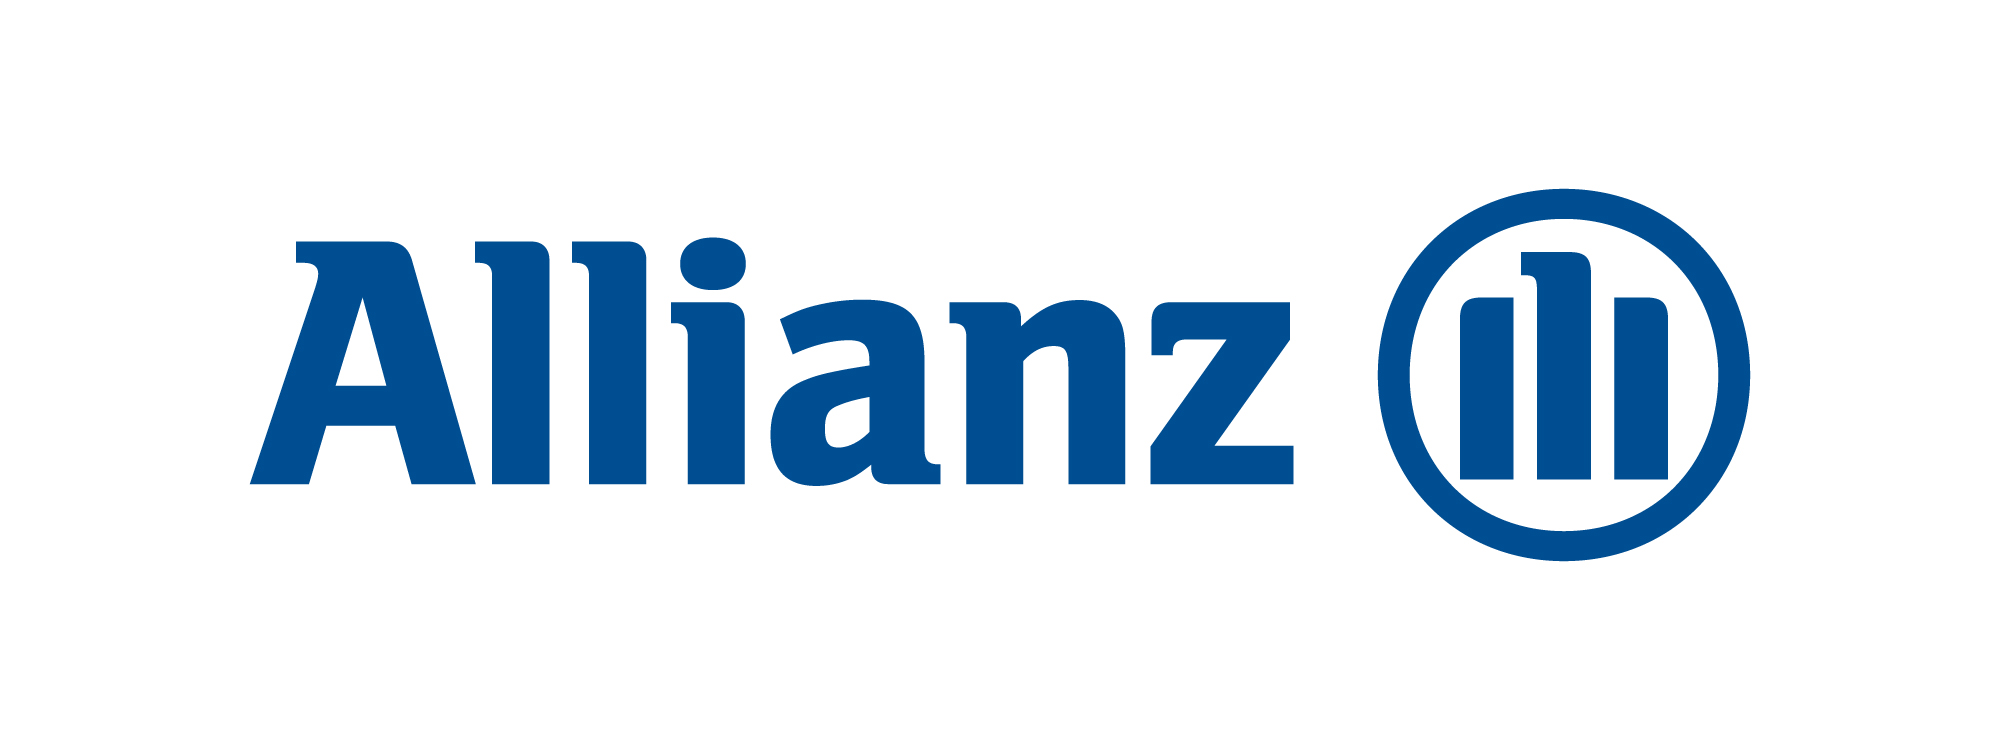 Allianz signs 10-year exclusive life insurance distribution agreement with HSBC in continental Europe